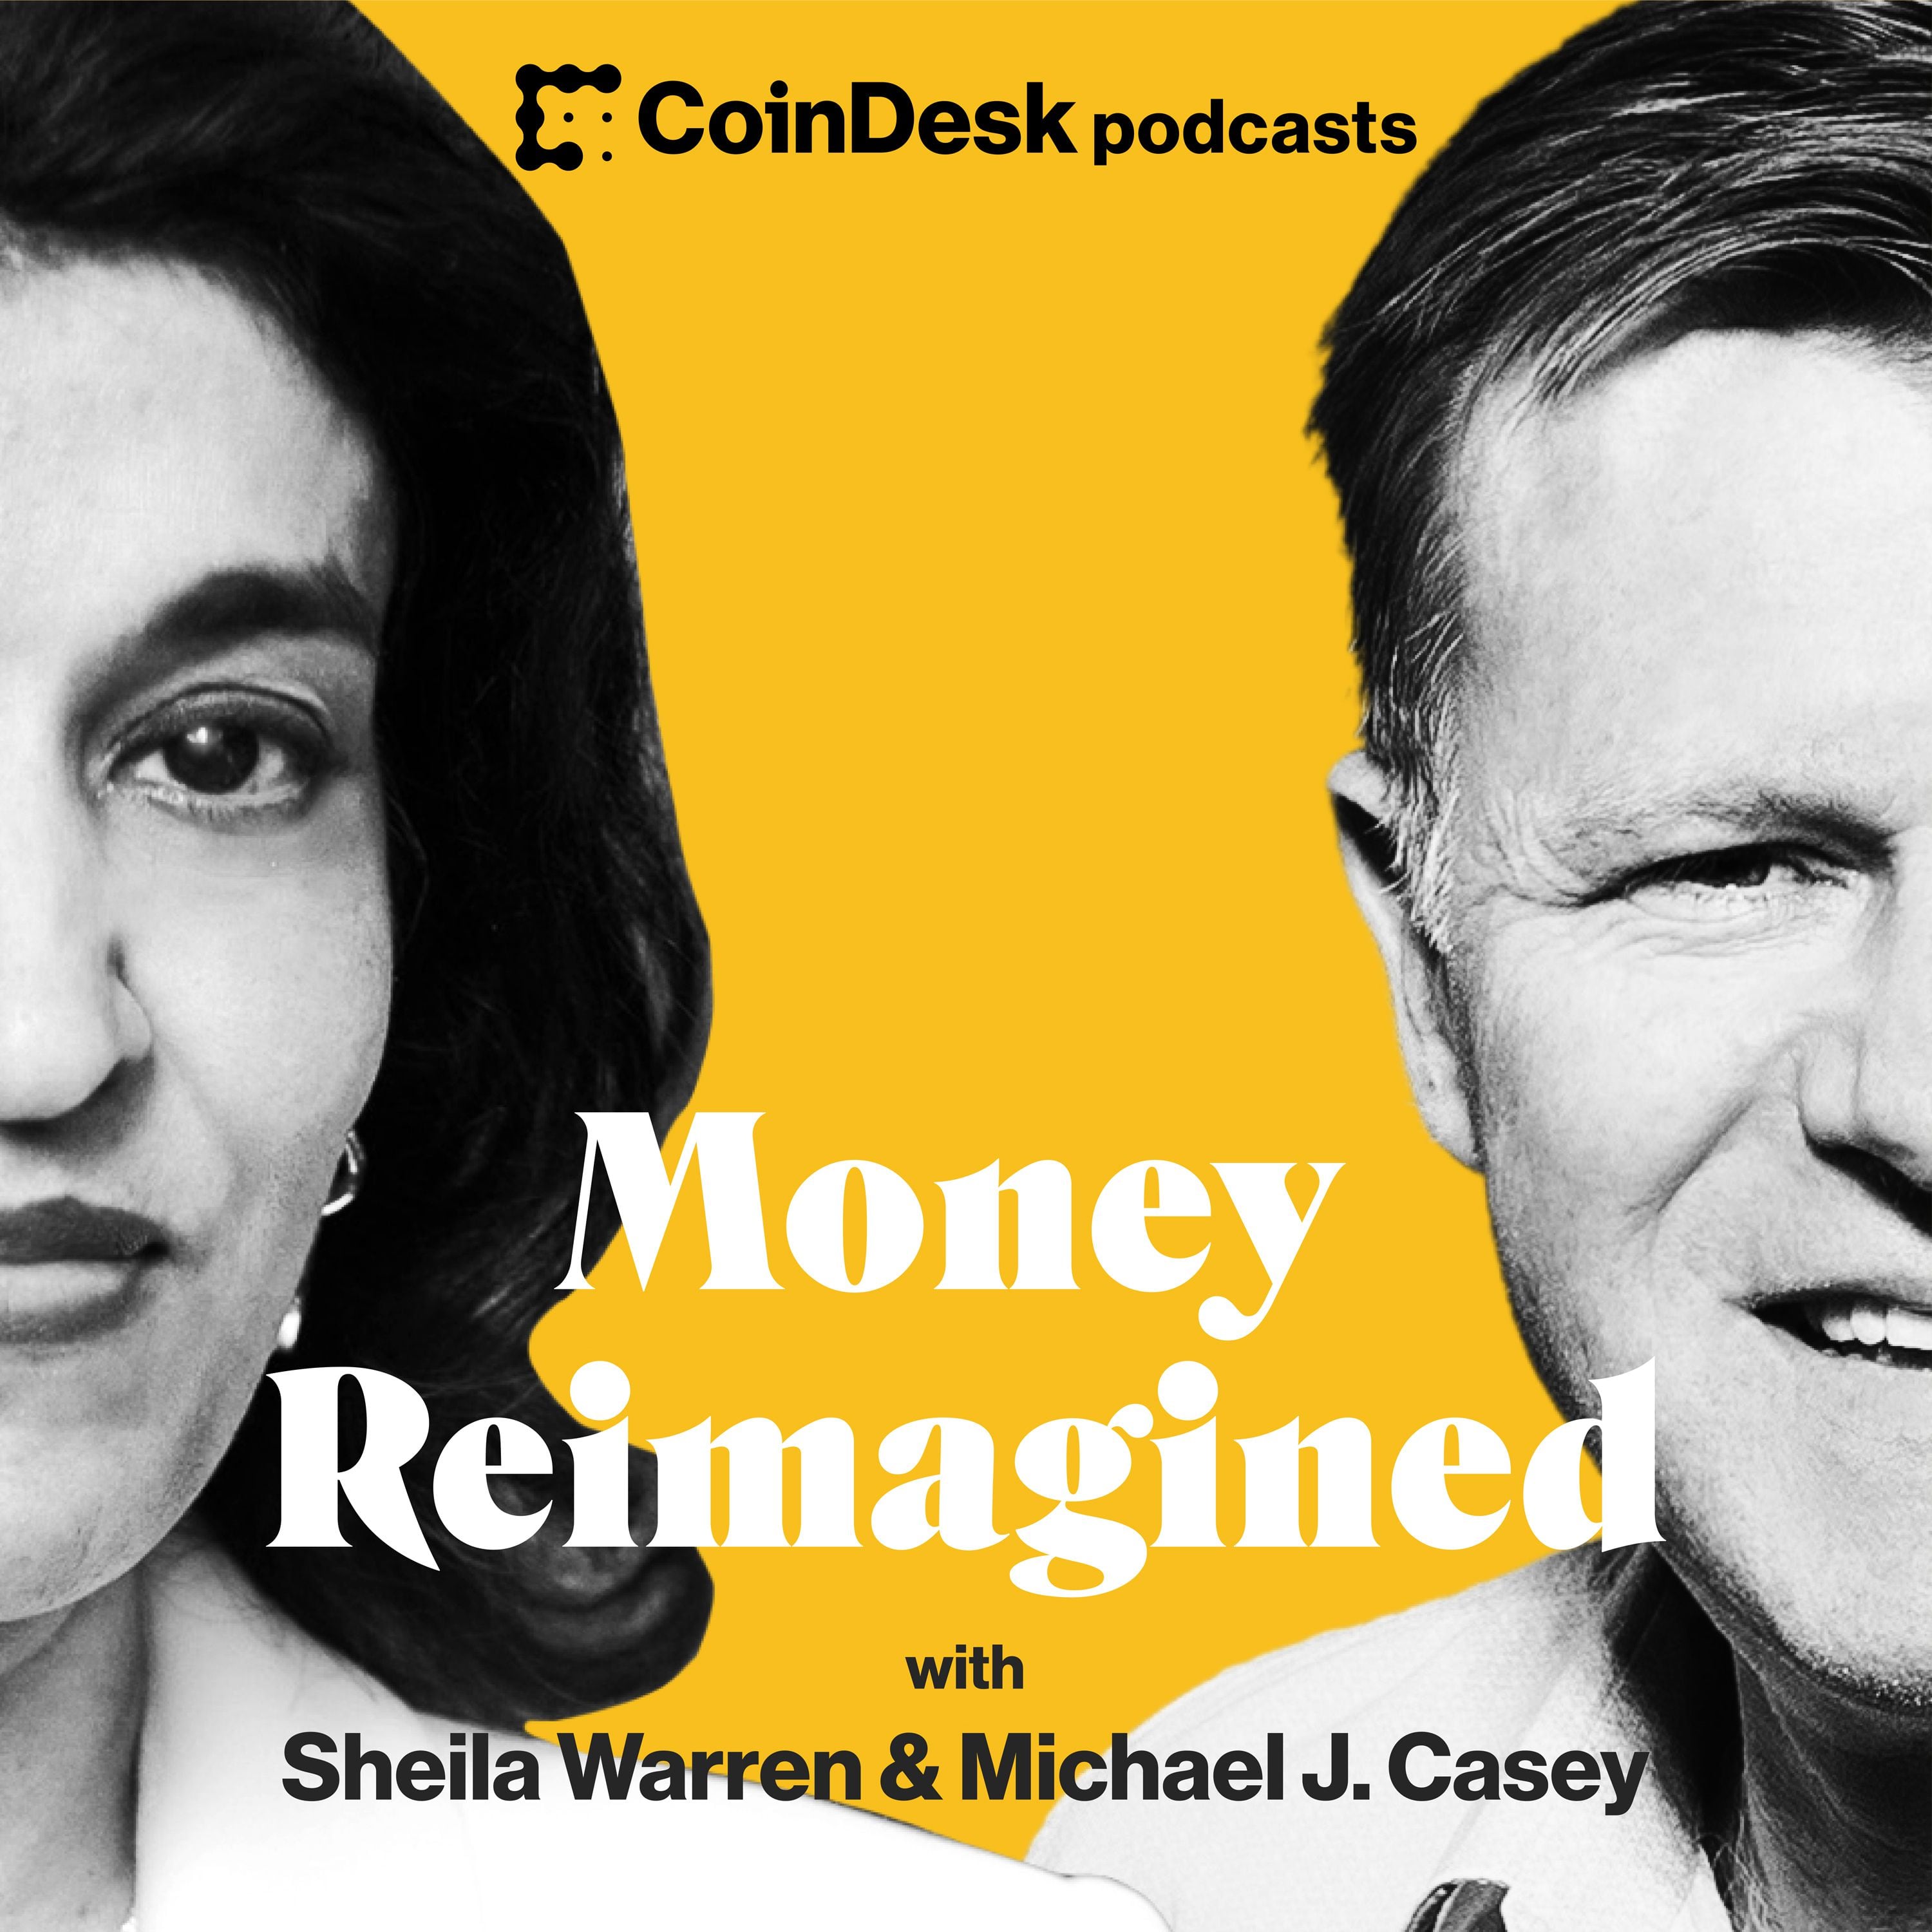 CoinDesk’s Money Reimagined